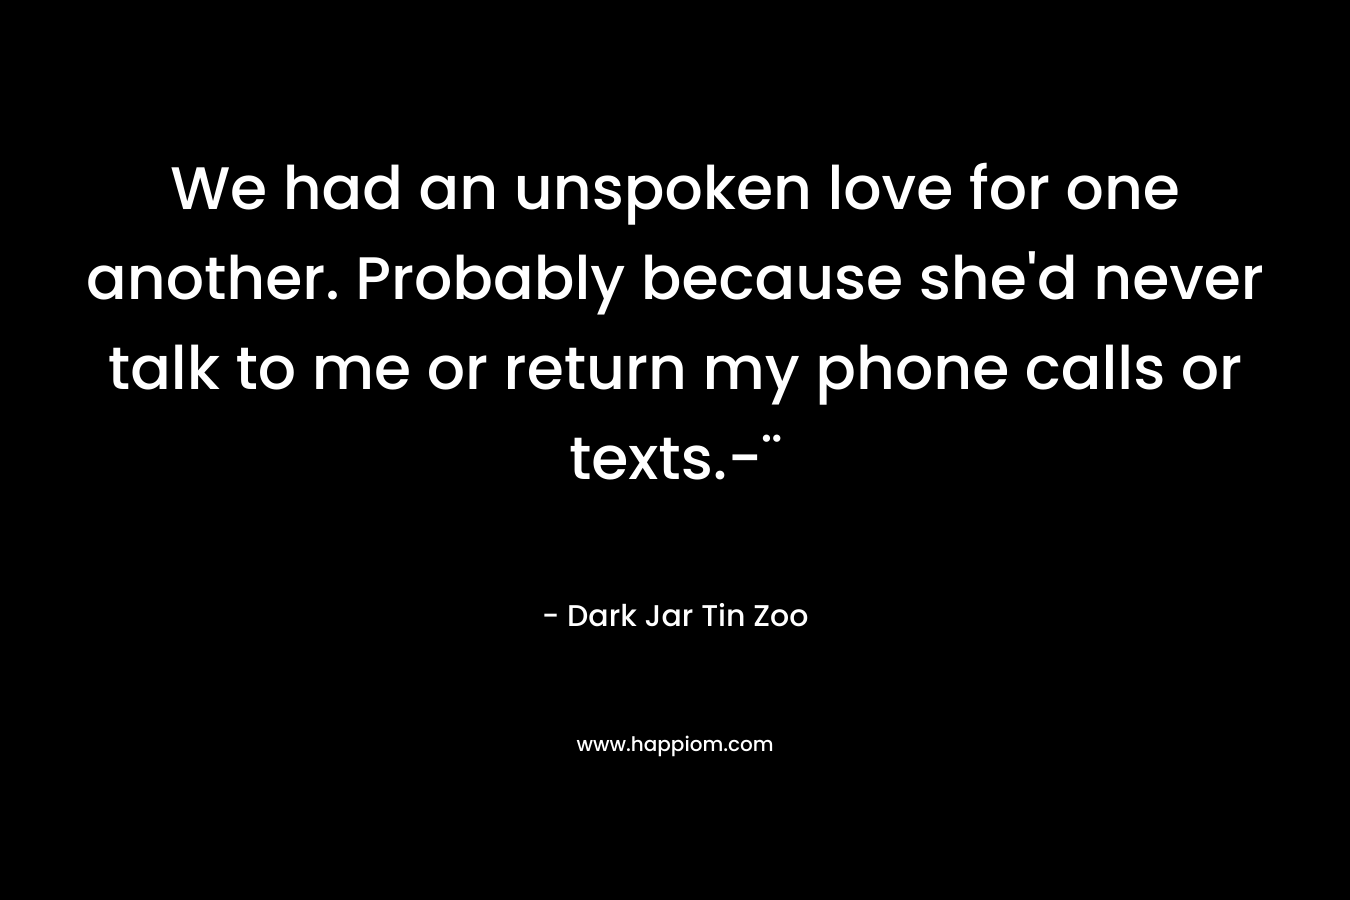 We had an unspoken love for one another. Probably because she’d never talk to me or return my phone calls or texts.-¨ – Dark Jar Tin Zoo